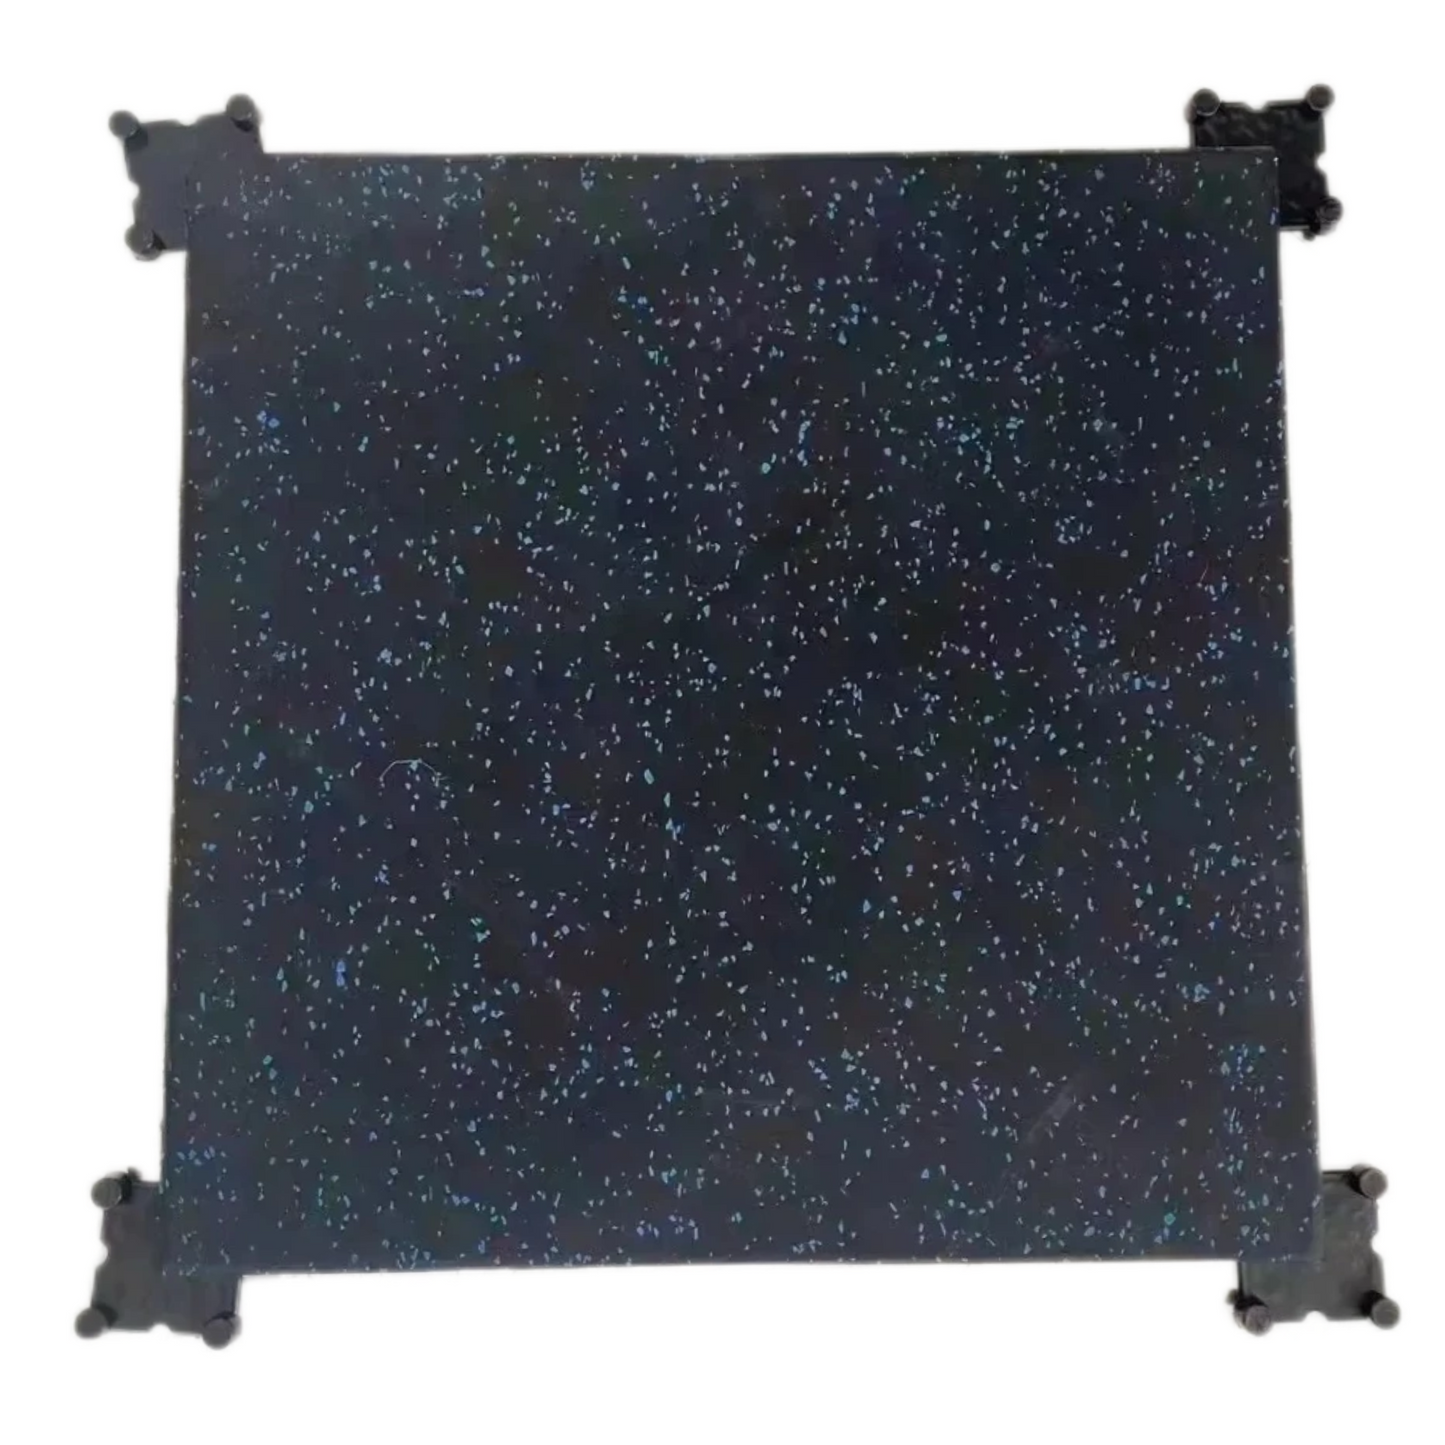 Rubber Mat 19.6" x 19.6" with plastic lock